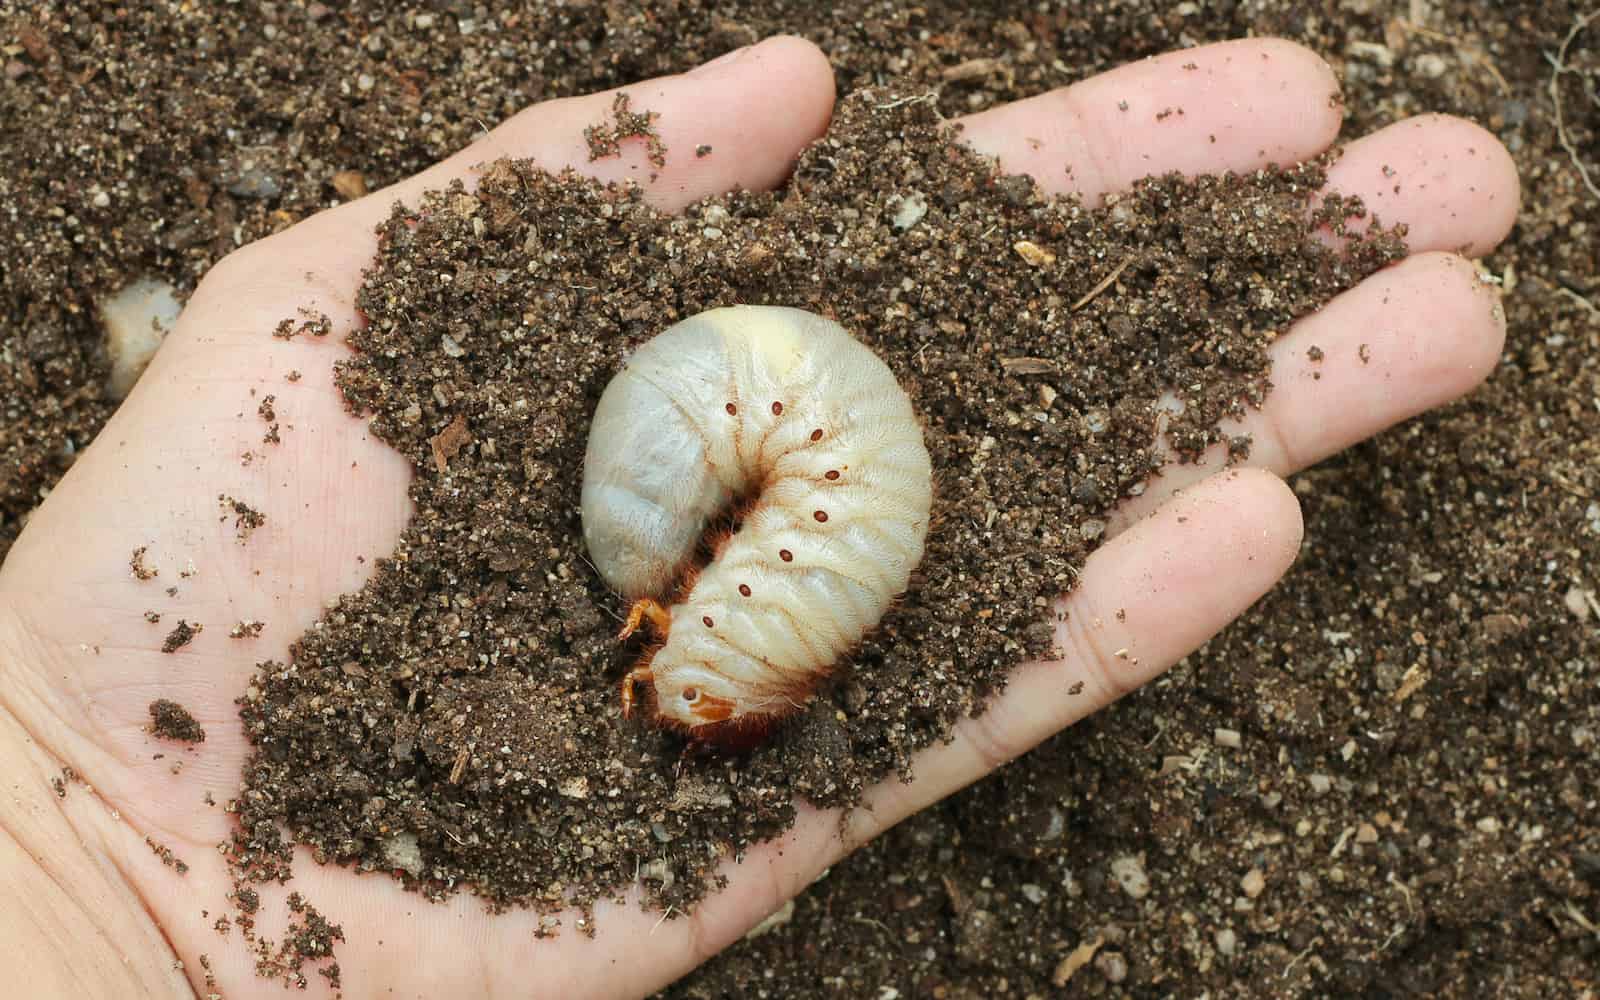 Image of grub worms in the human hand